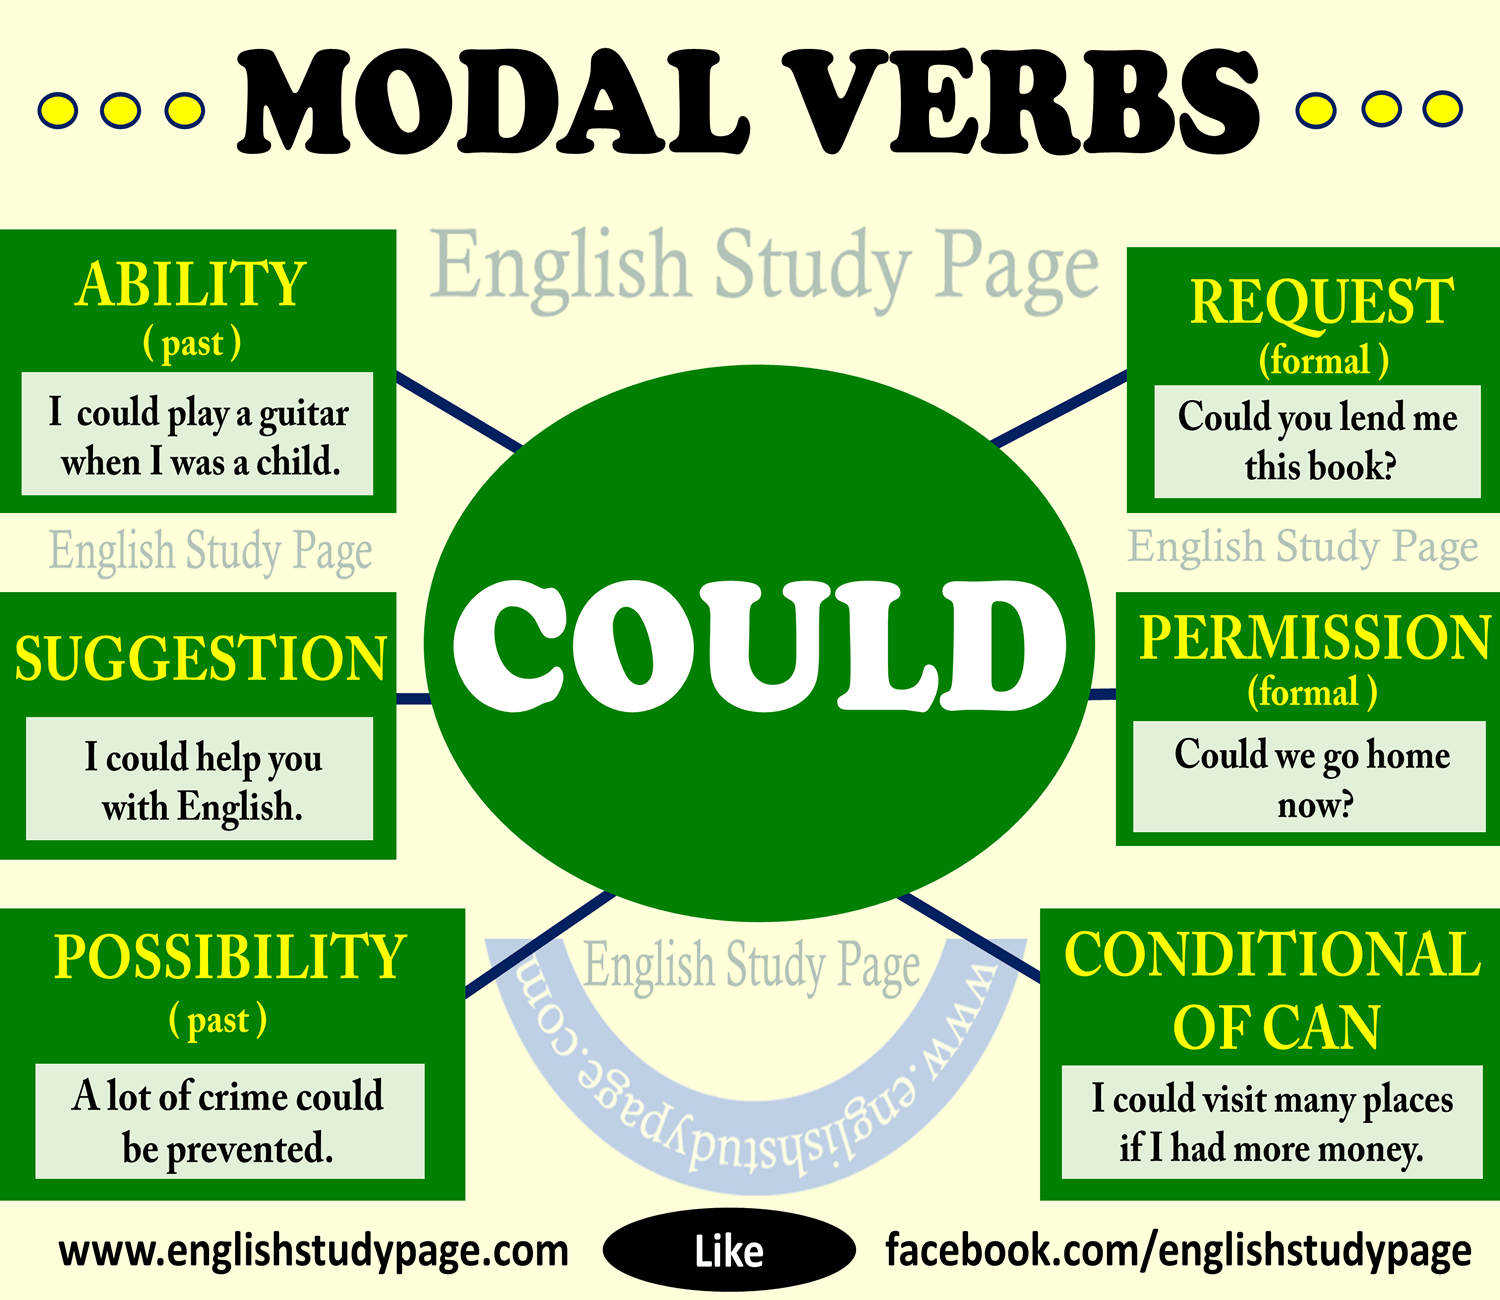 modal-verbs-could-english-study-page